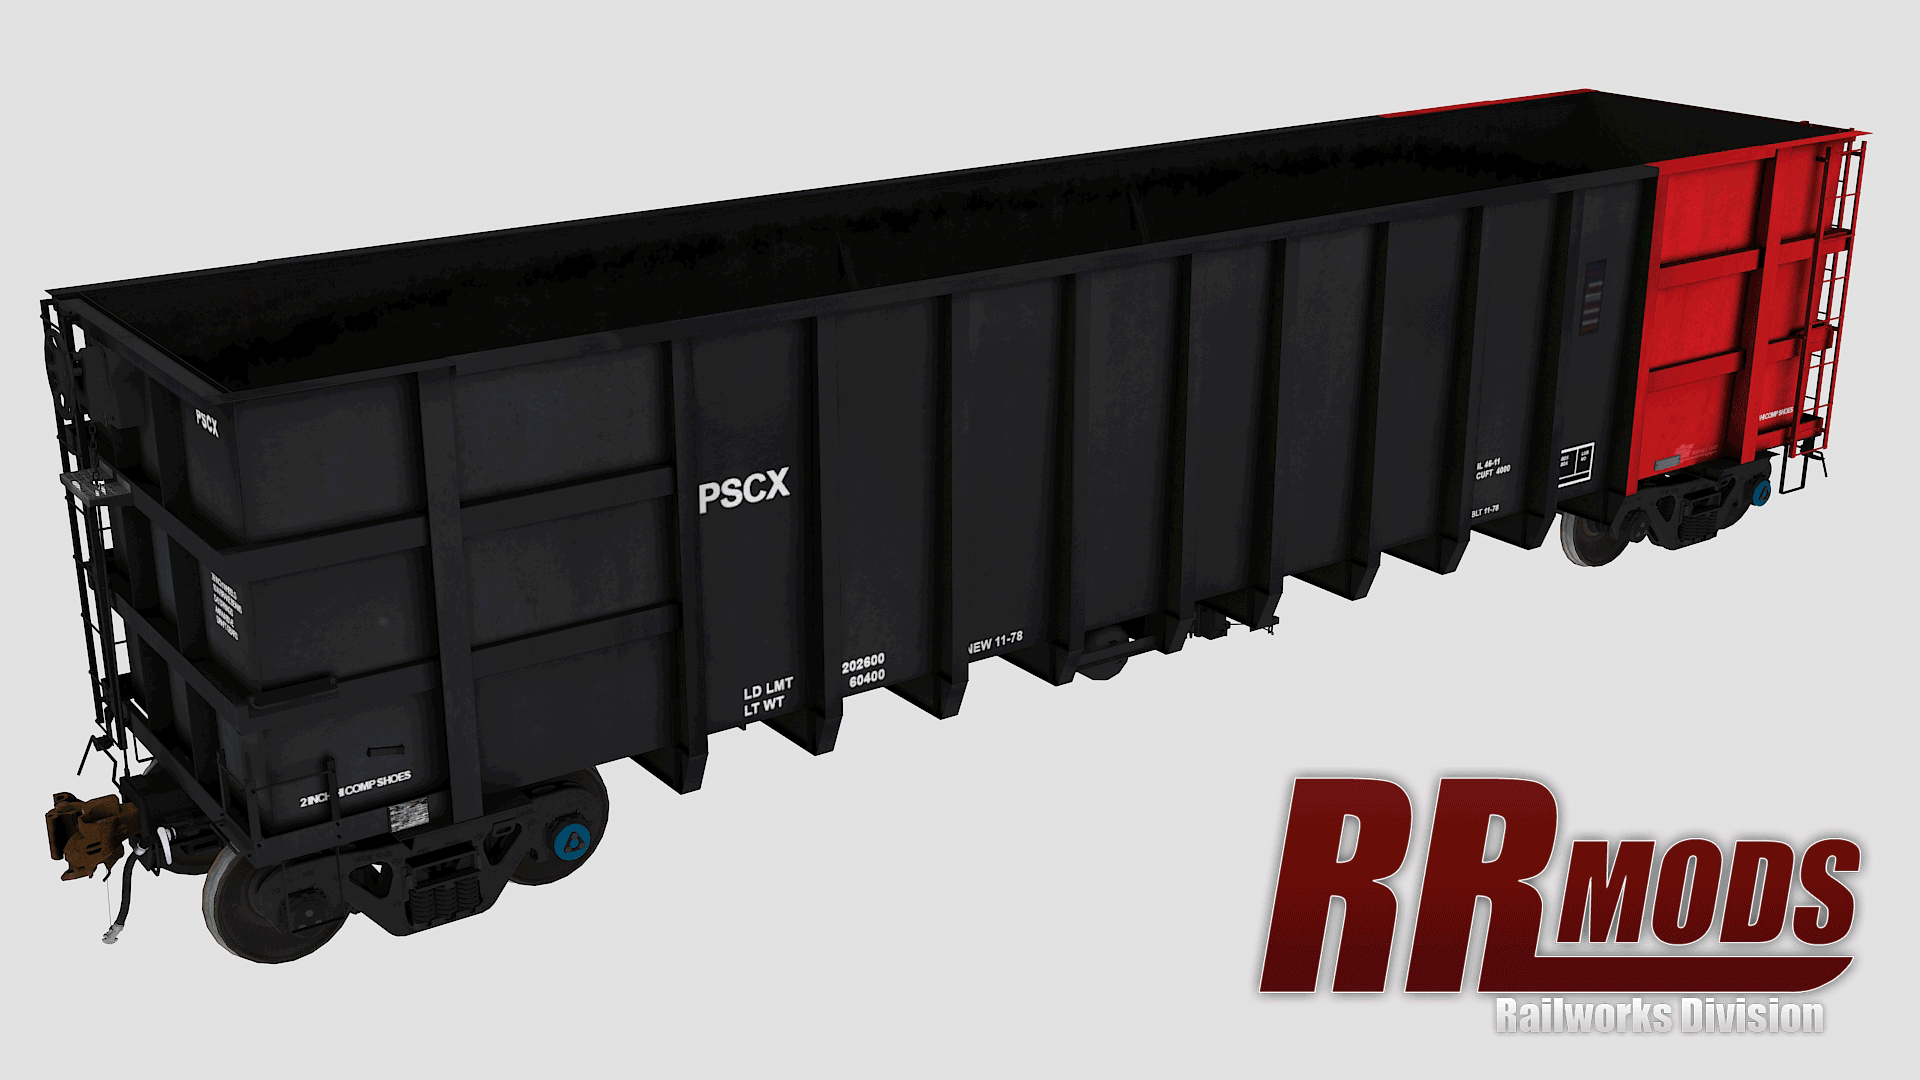 The part of a black digital product, rail boggy